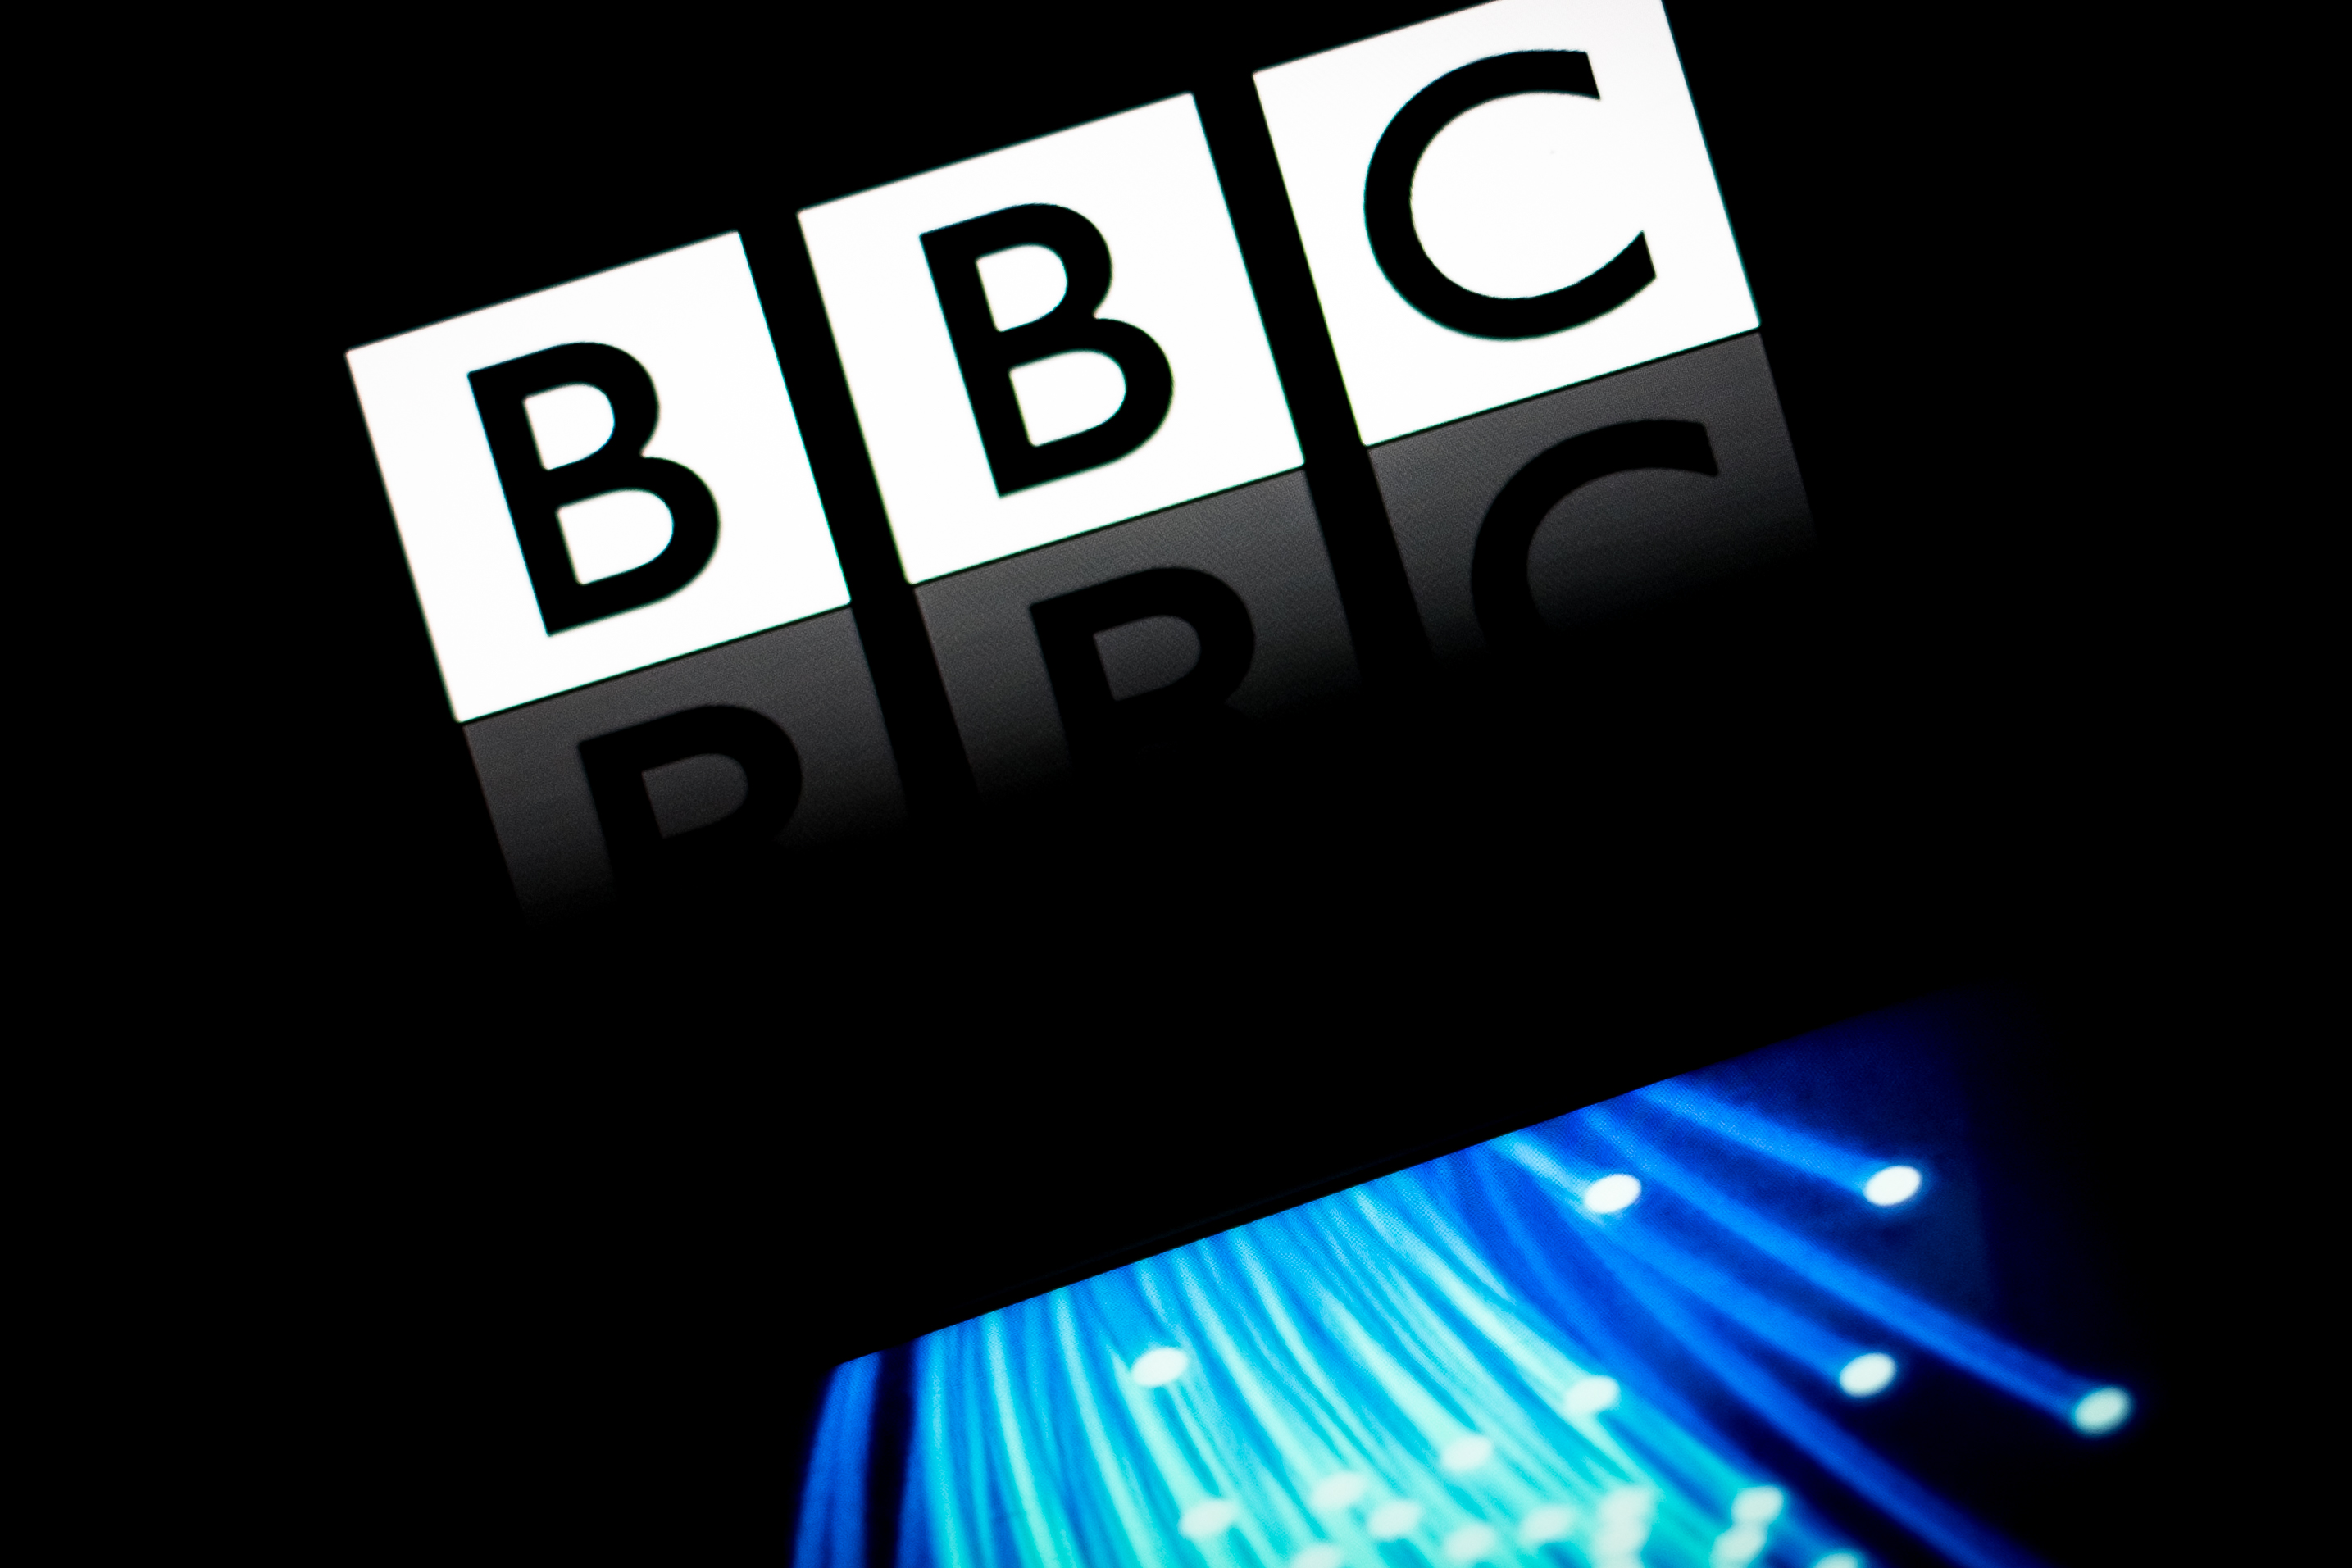 Moscow curbs access to BBC, Radio Liberty over 'fake news'